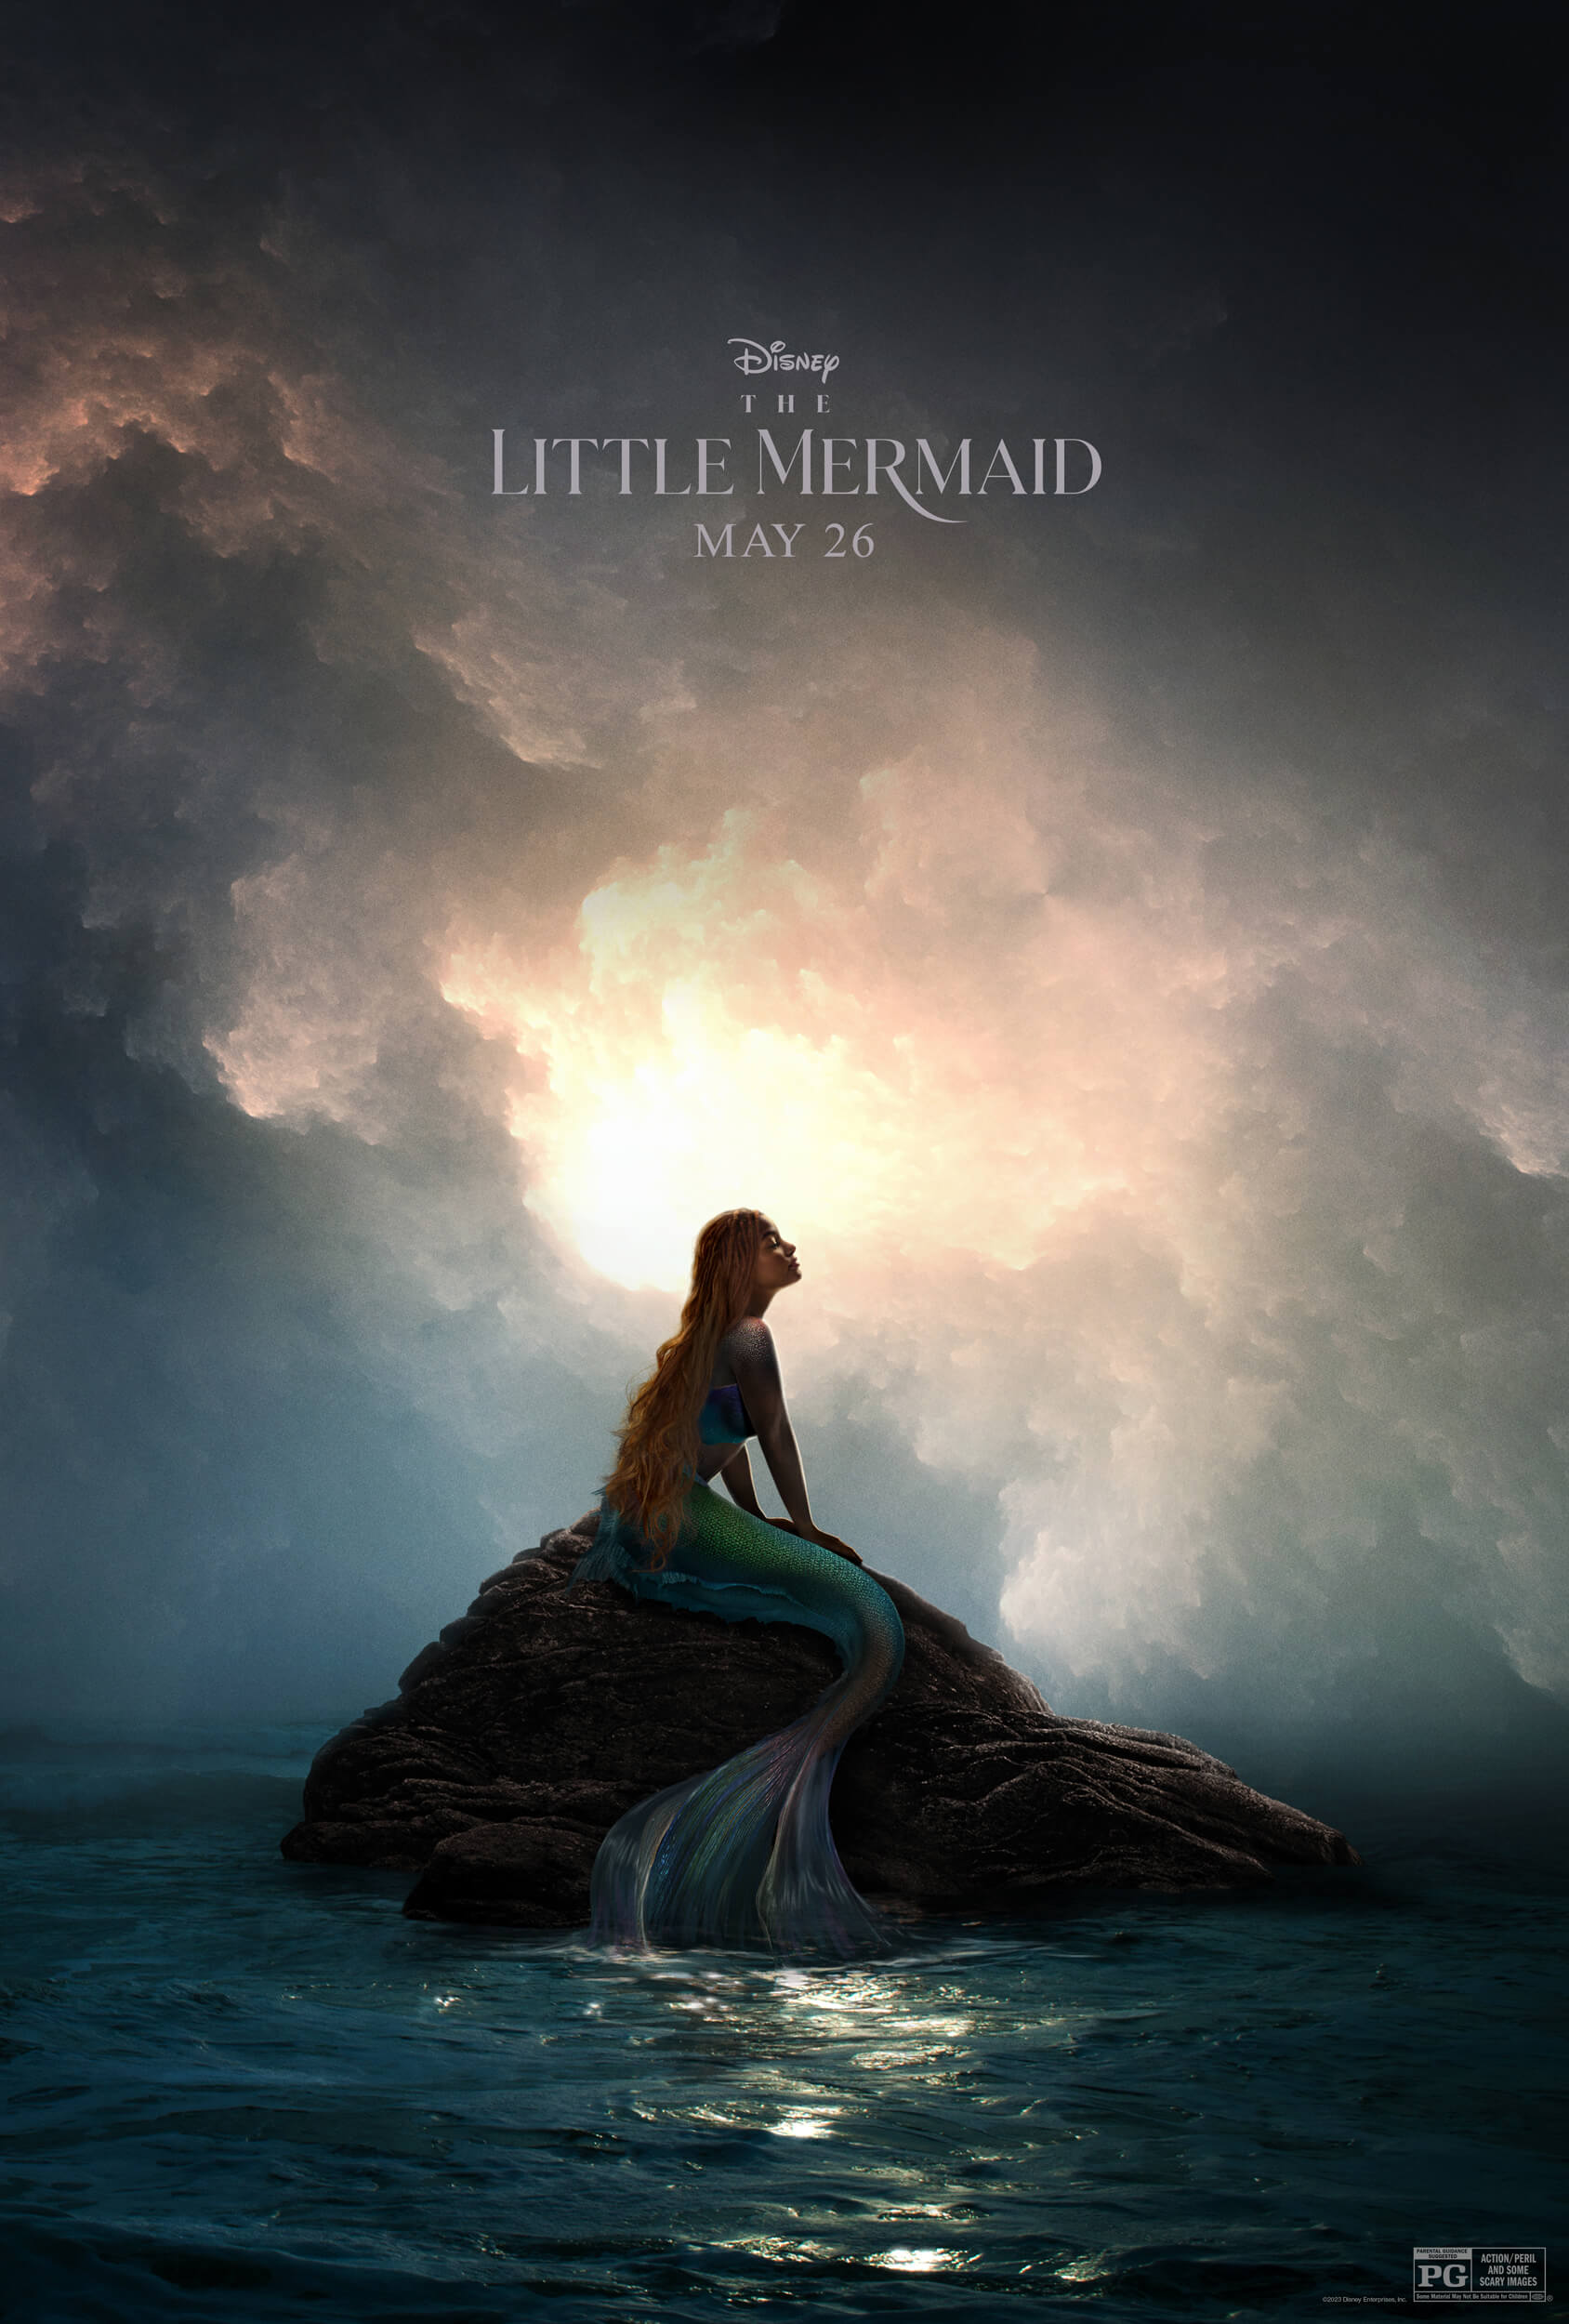 The Little Mermaid Movie (2023) Cast, Release Date, Story, Budget, Collection, Poster, Trailer, Review